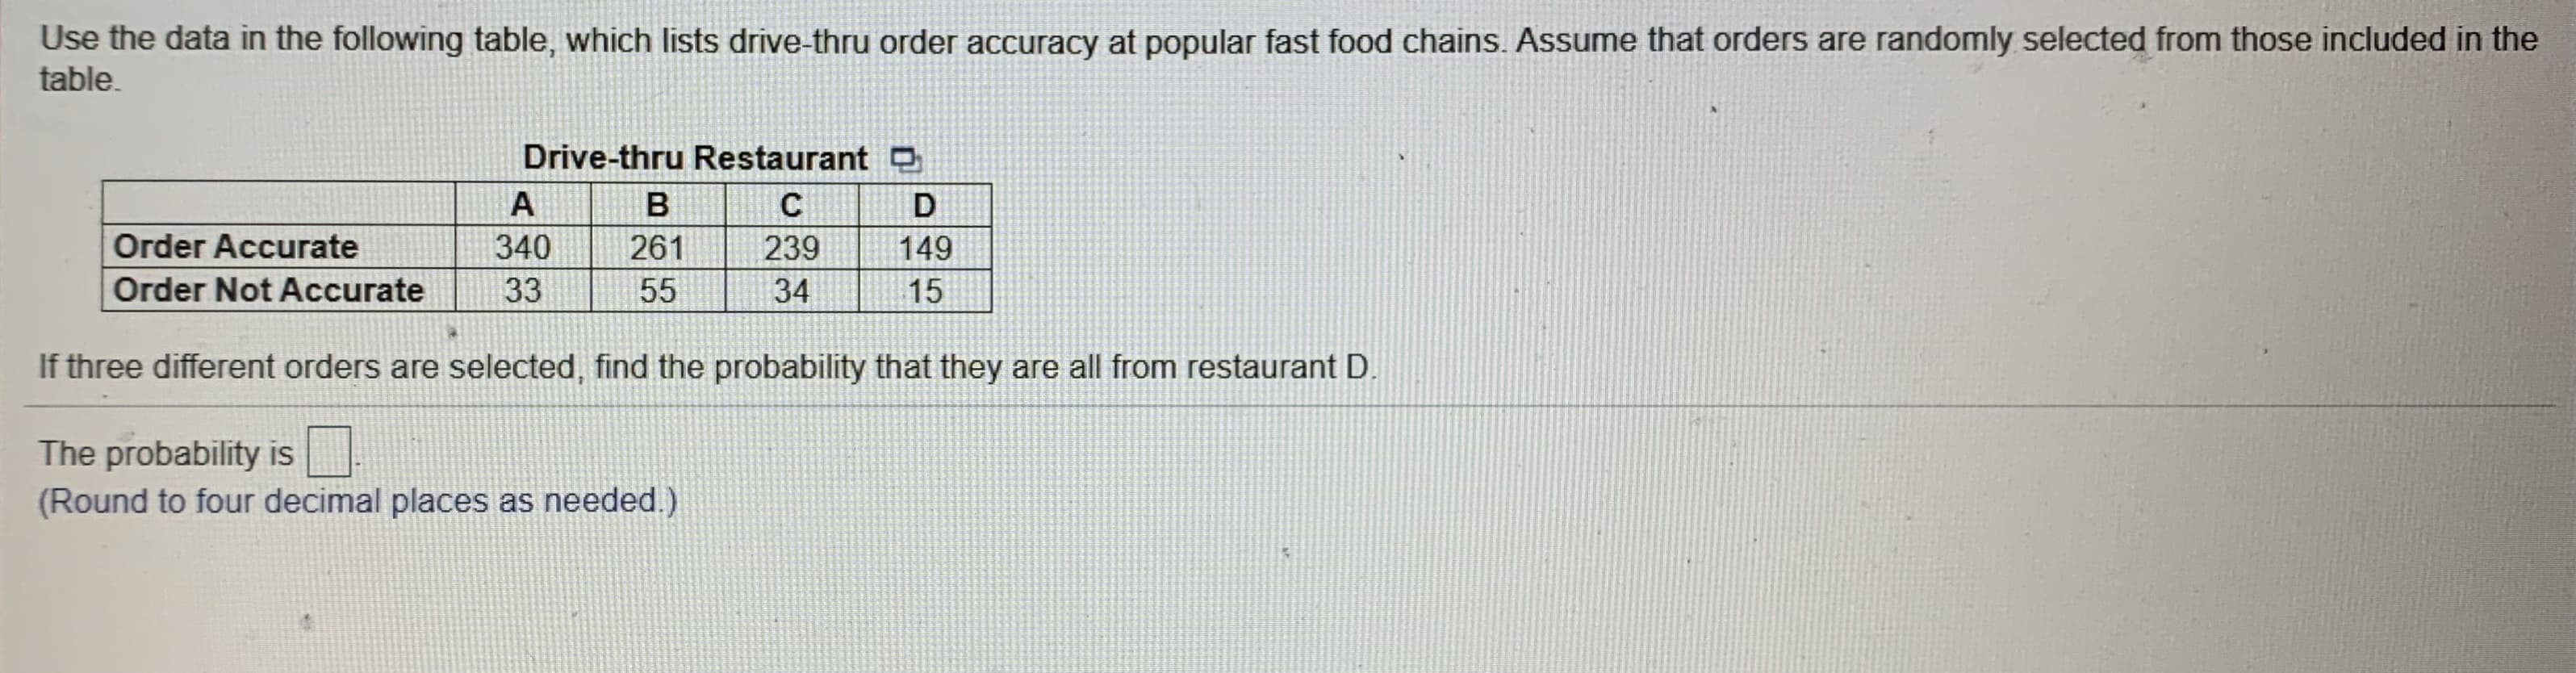 Use the data in the following table, which lists drive-thru order accuracy at popular fast food chains. Assume that orders are randomly selected from those included in the
table.
Drive-thru Restaurant D
A
Order Accurate
340
261
239
149
Order Not Accurate
33
55
34
15
If three different orders are selected, find the probability that they are all from restaurant D.
The probability is
(Round to four decimal places as needed.)
